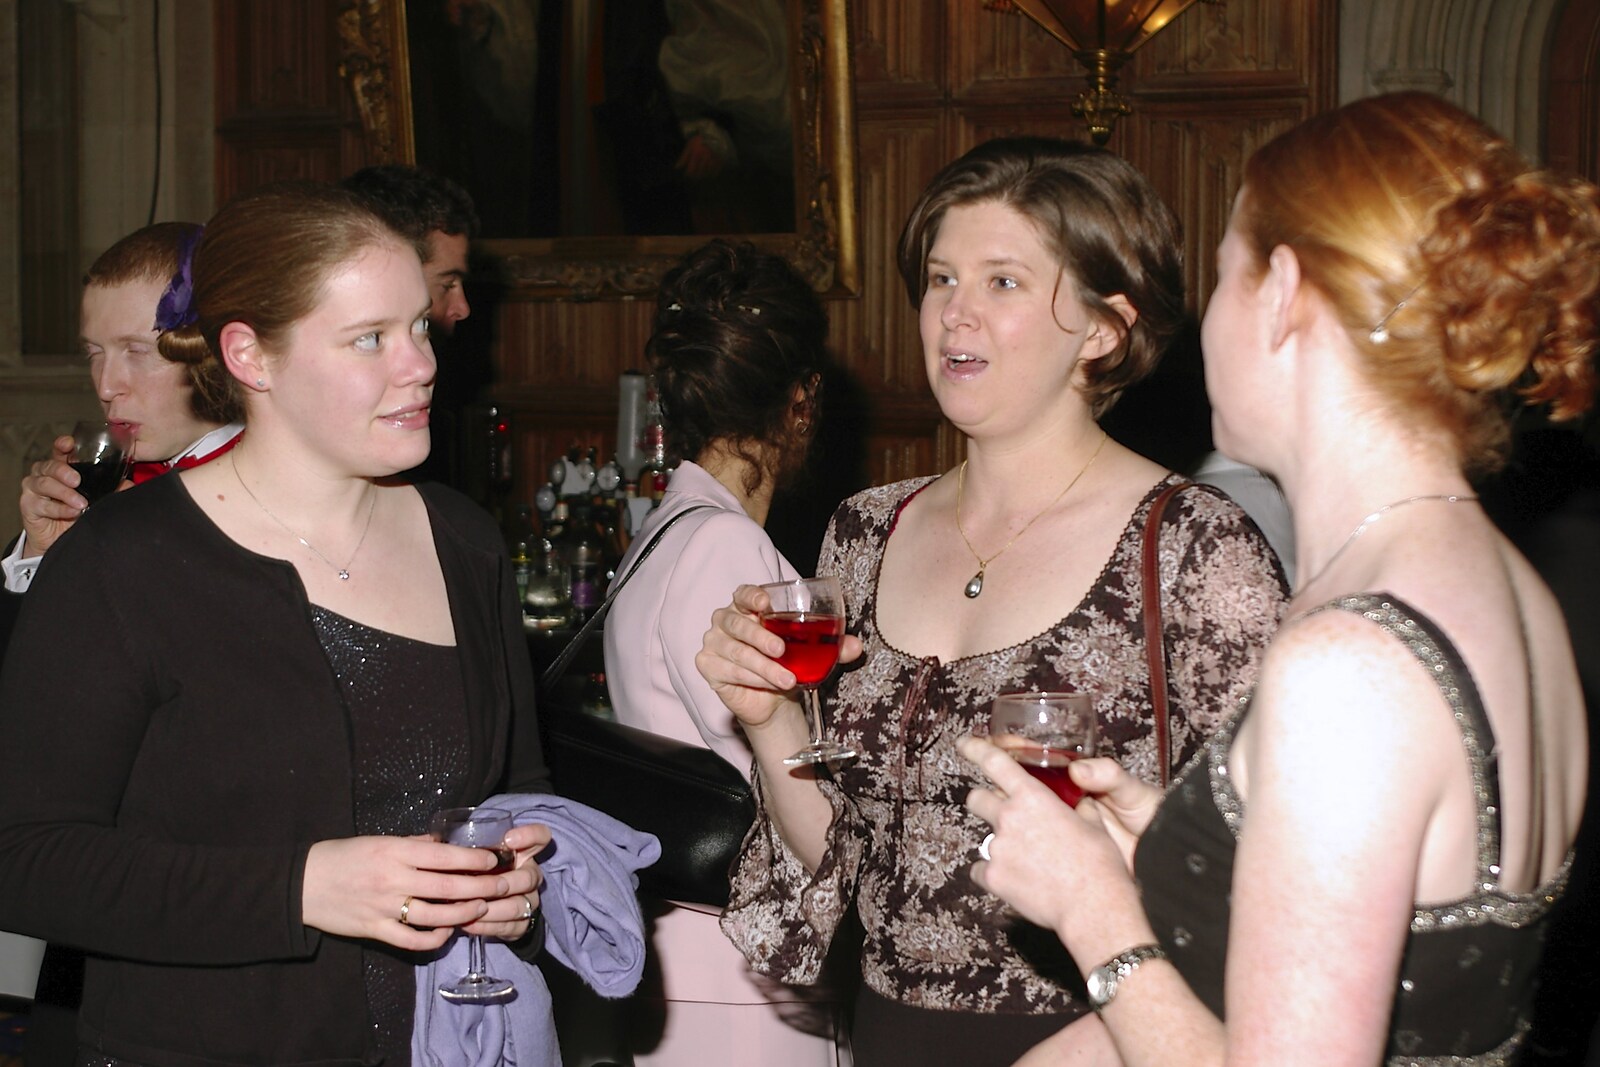 Clare, Liz and Cath from Qualcomm Cambridge's Christmas Do, King's College, Cambridge - 22nd December 2004